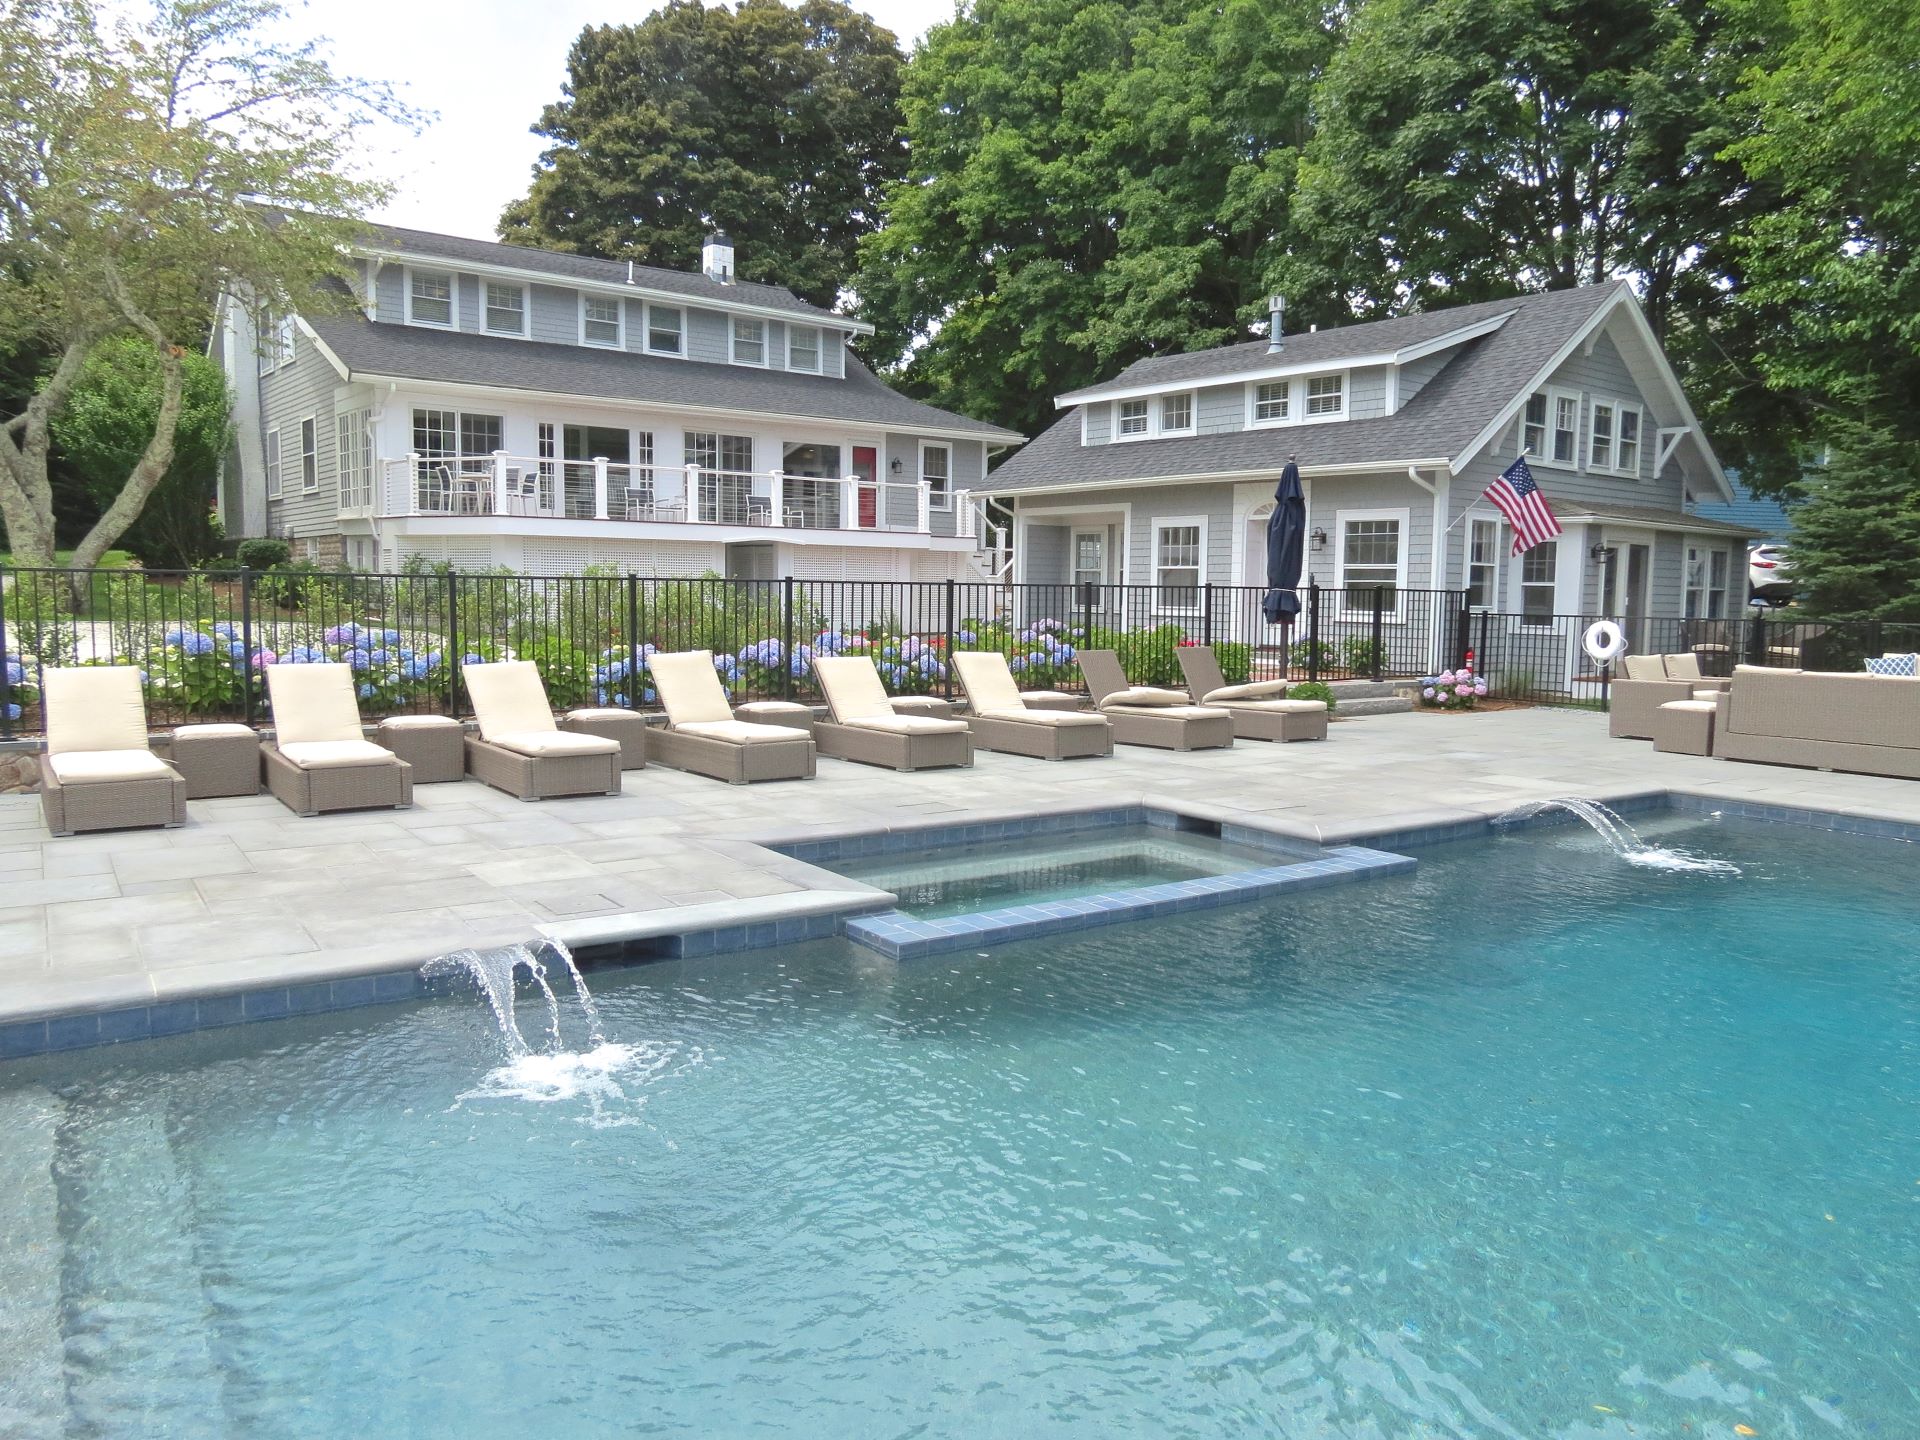 Pool Area at our Vacation Rentals in Cape Cod